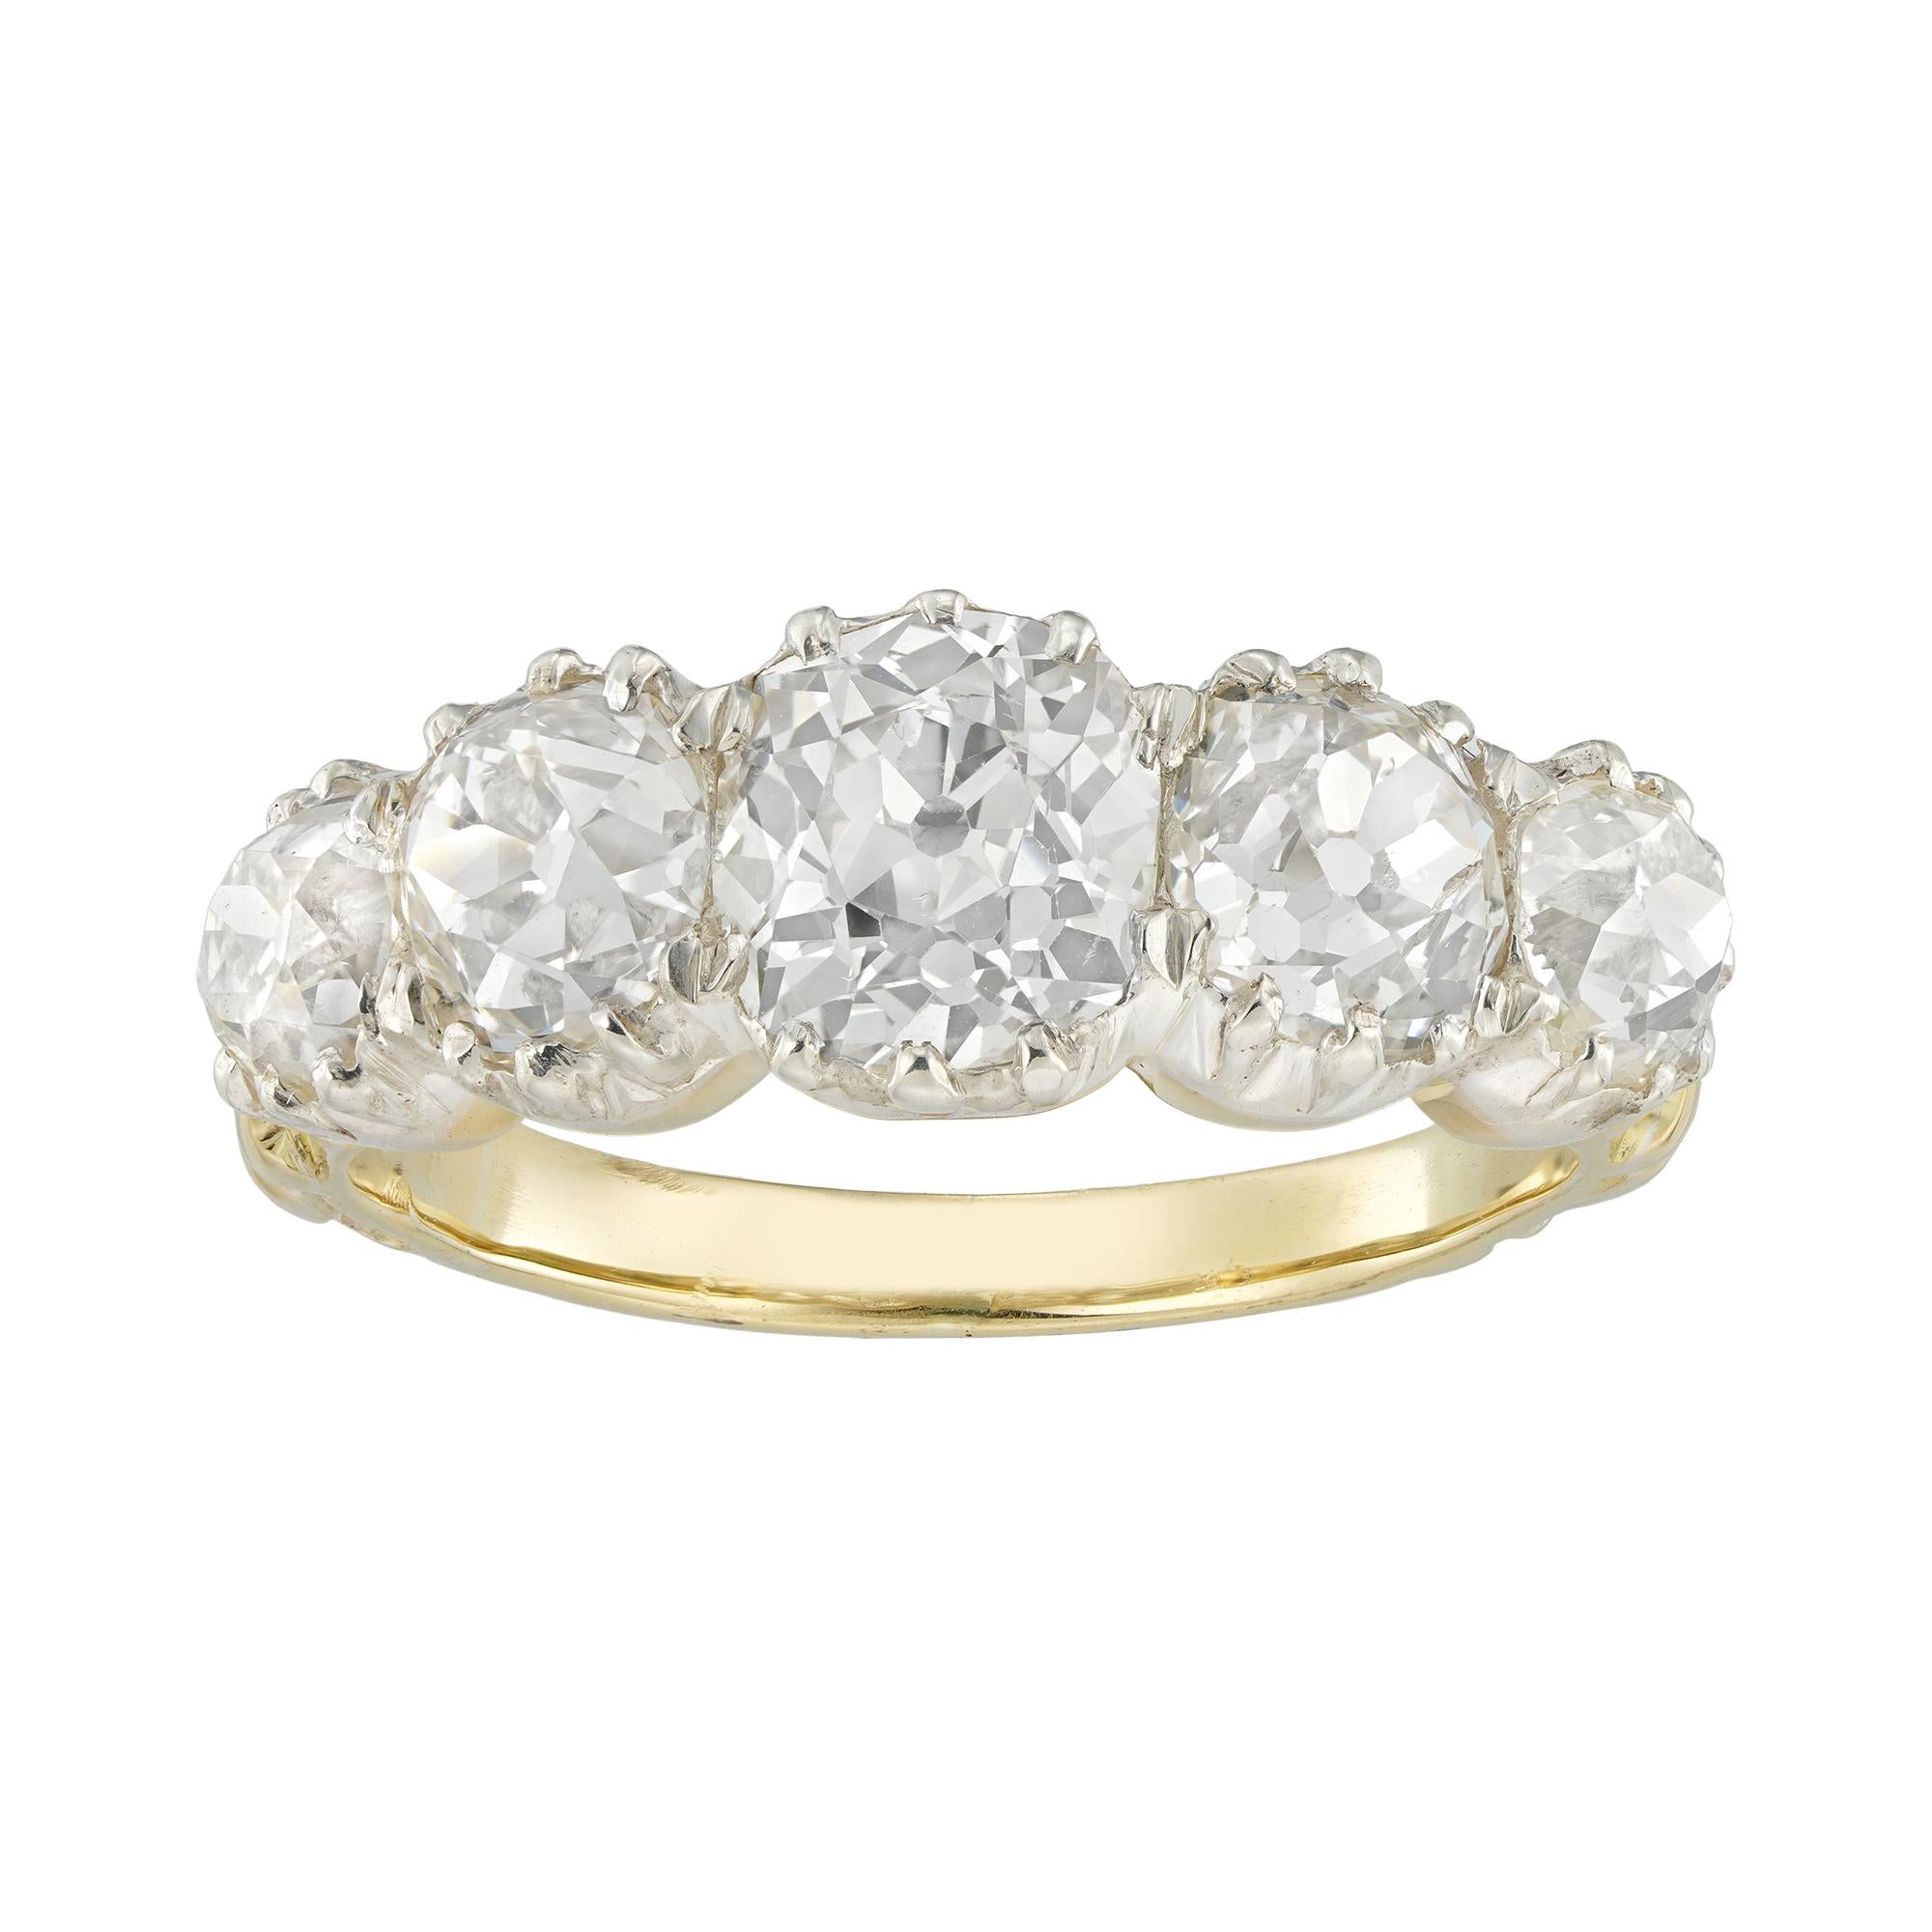 A Victorian five stone diamond ring, the five cushion shaped old European-cut diamonds estimated to weigh approximately 3¼ carats in total, assessed to be of I-J colour VS-SI clarity, all cut-down set in silver with a gold mount, with finely